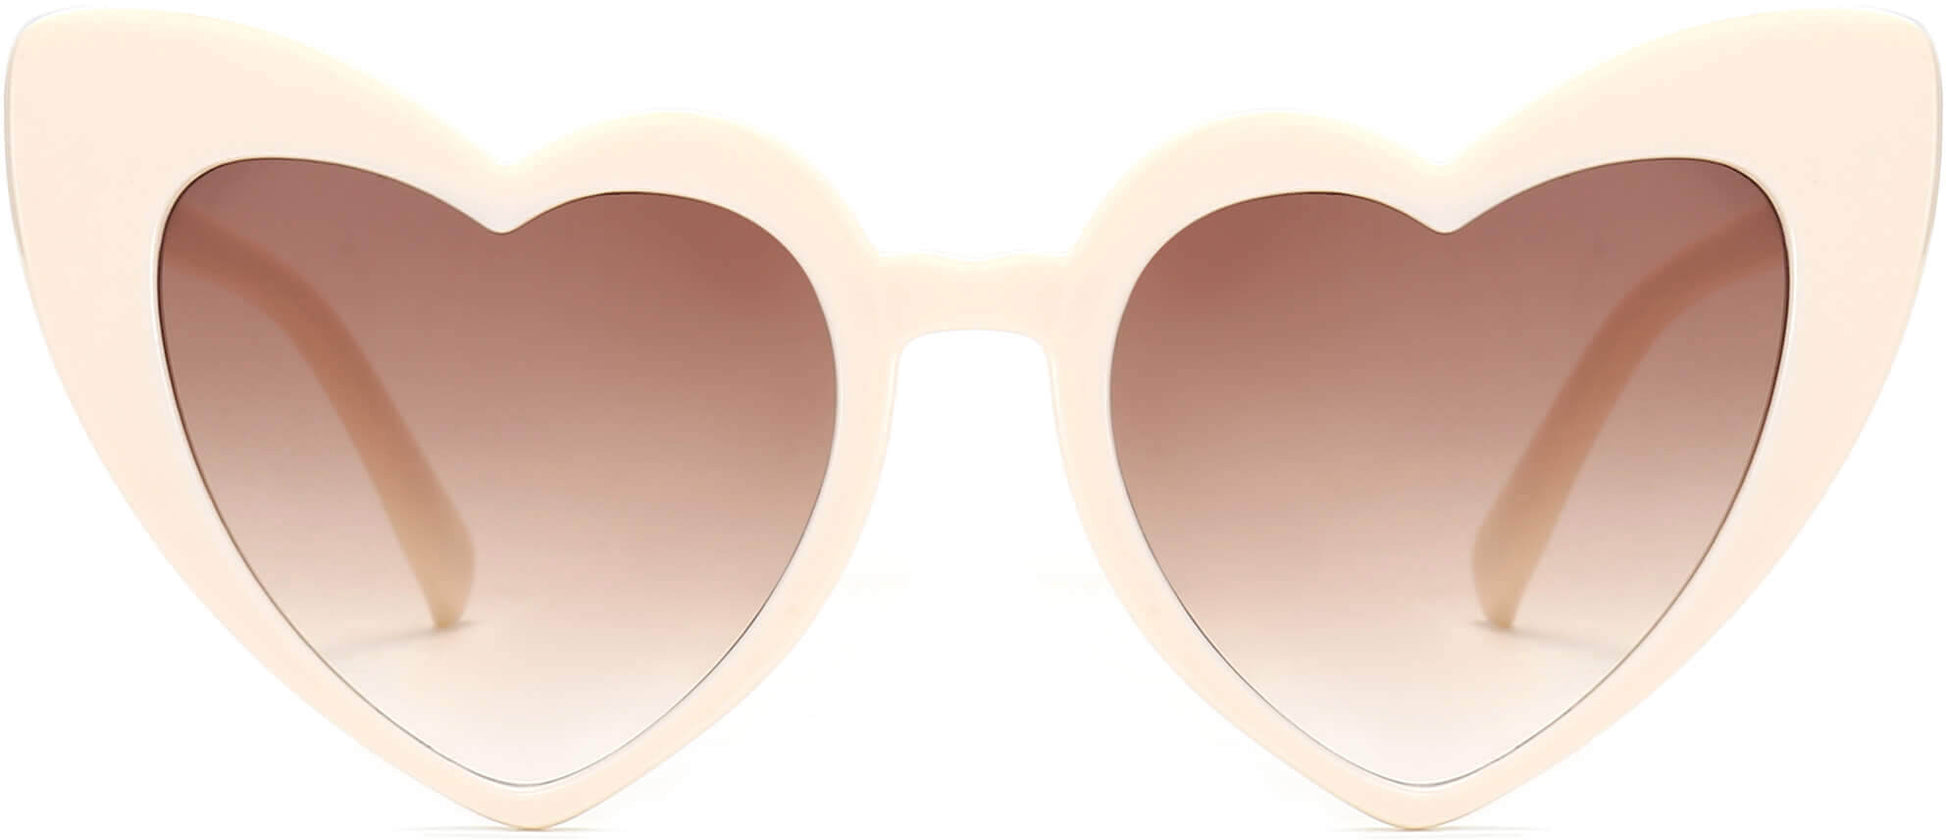 Alaia White Plastic Sunglasses from ANRRI, front view